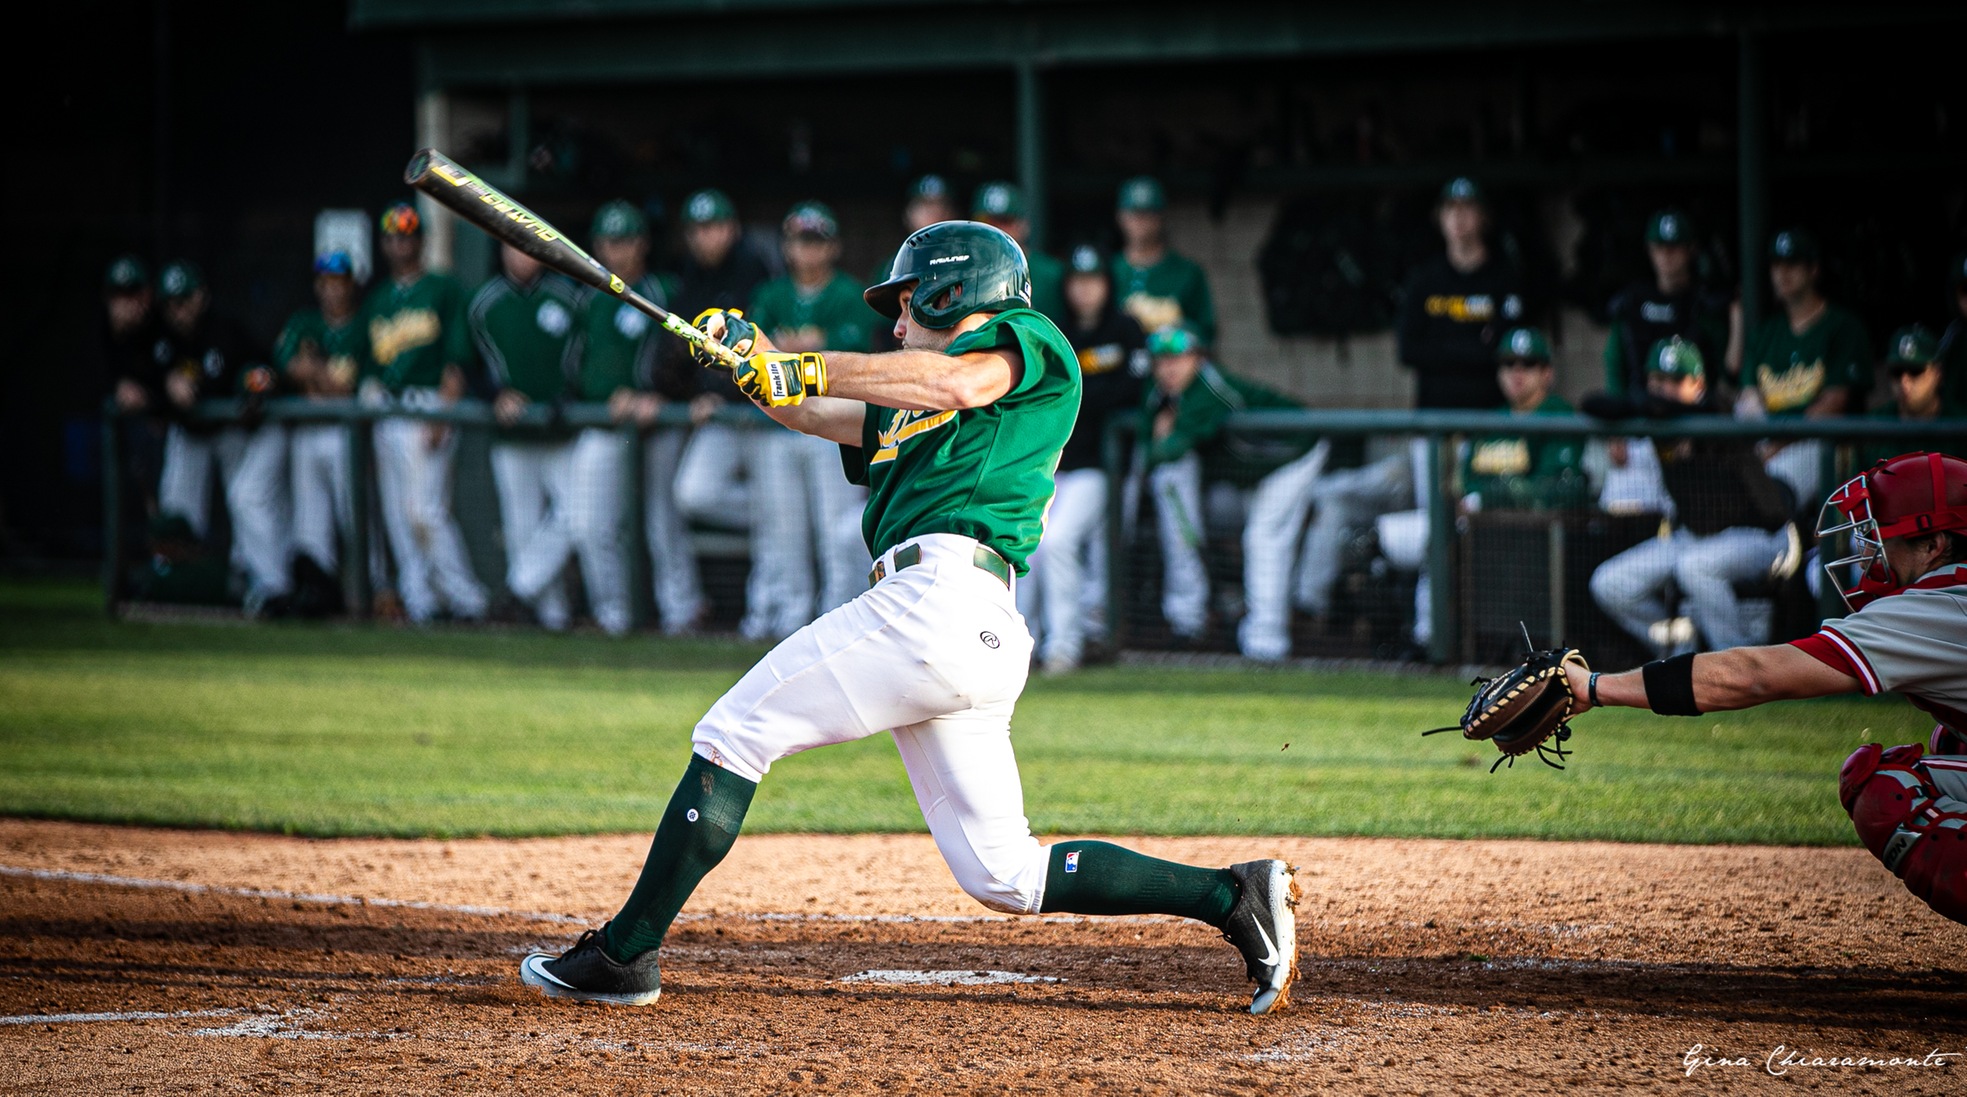 Baseball: Completes Series Sweep with Another Blowout Win